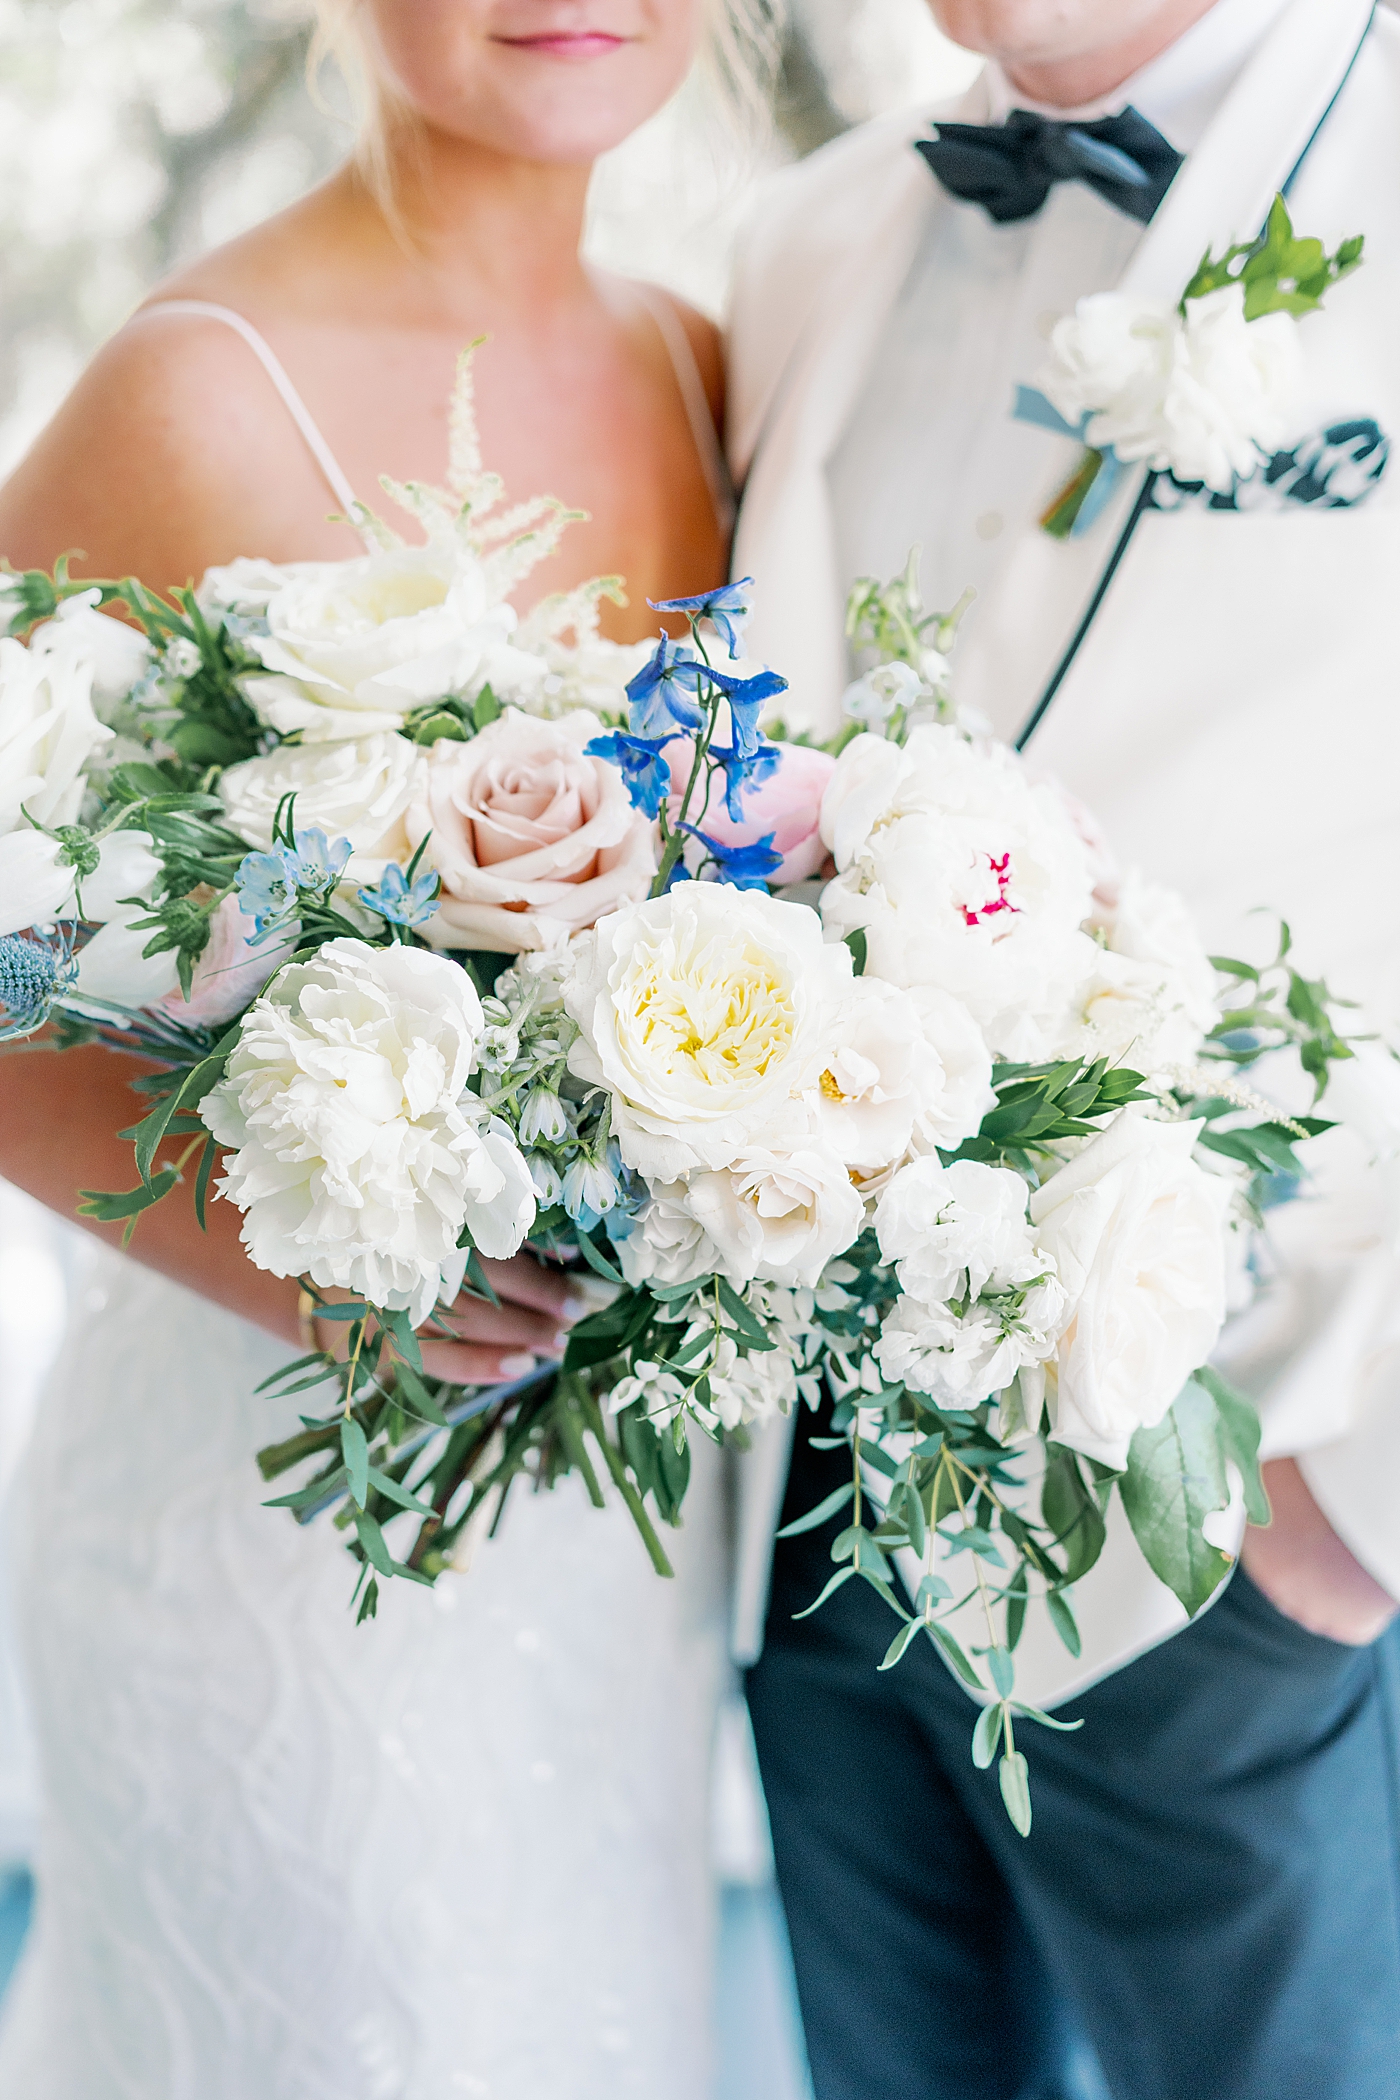 Bridal bouquet held by bride and groom during their Elegant Grandmillenial Charleston Wedding | Images by Annie Laura Photography